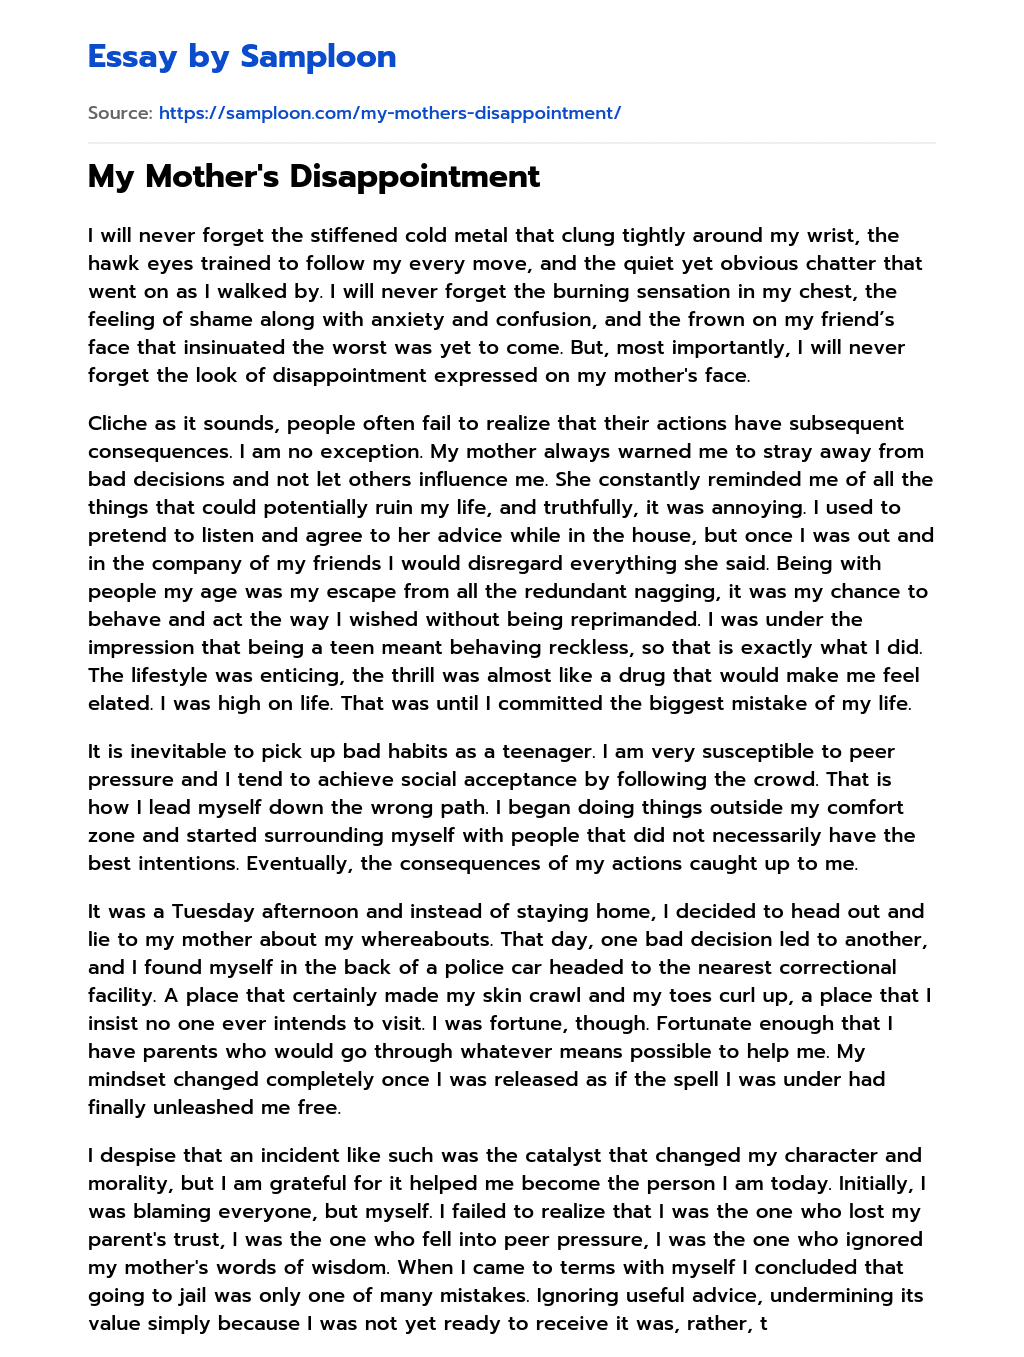 My Mother’s Disappointment essay